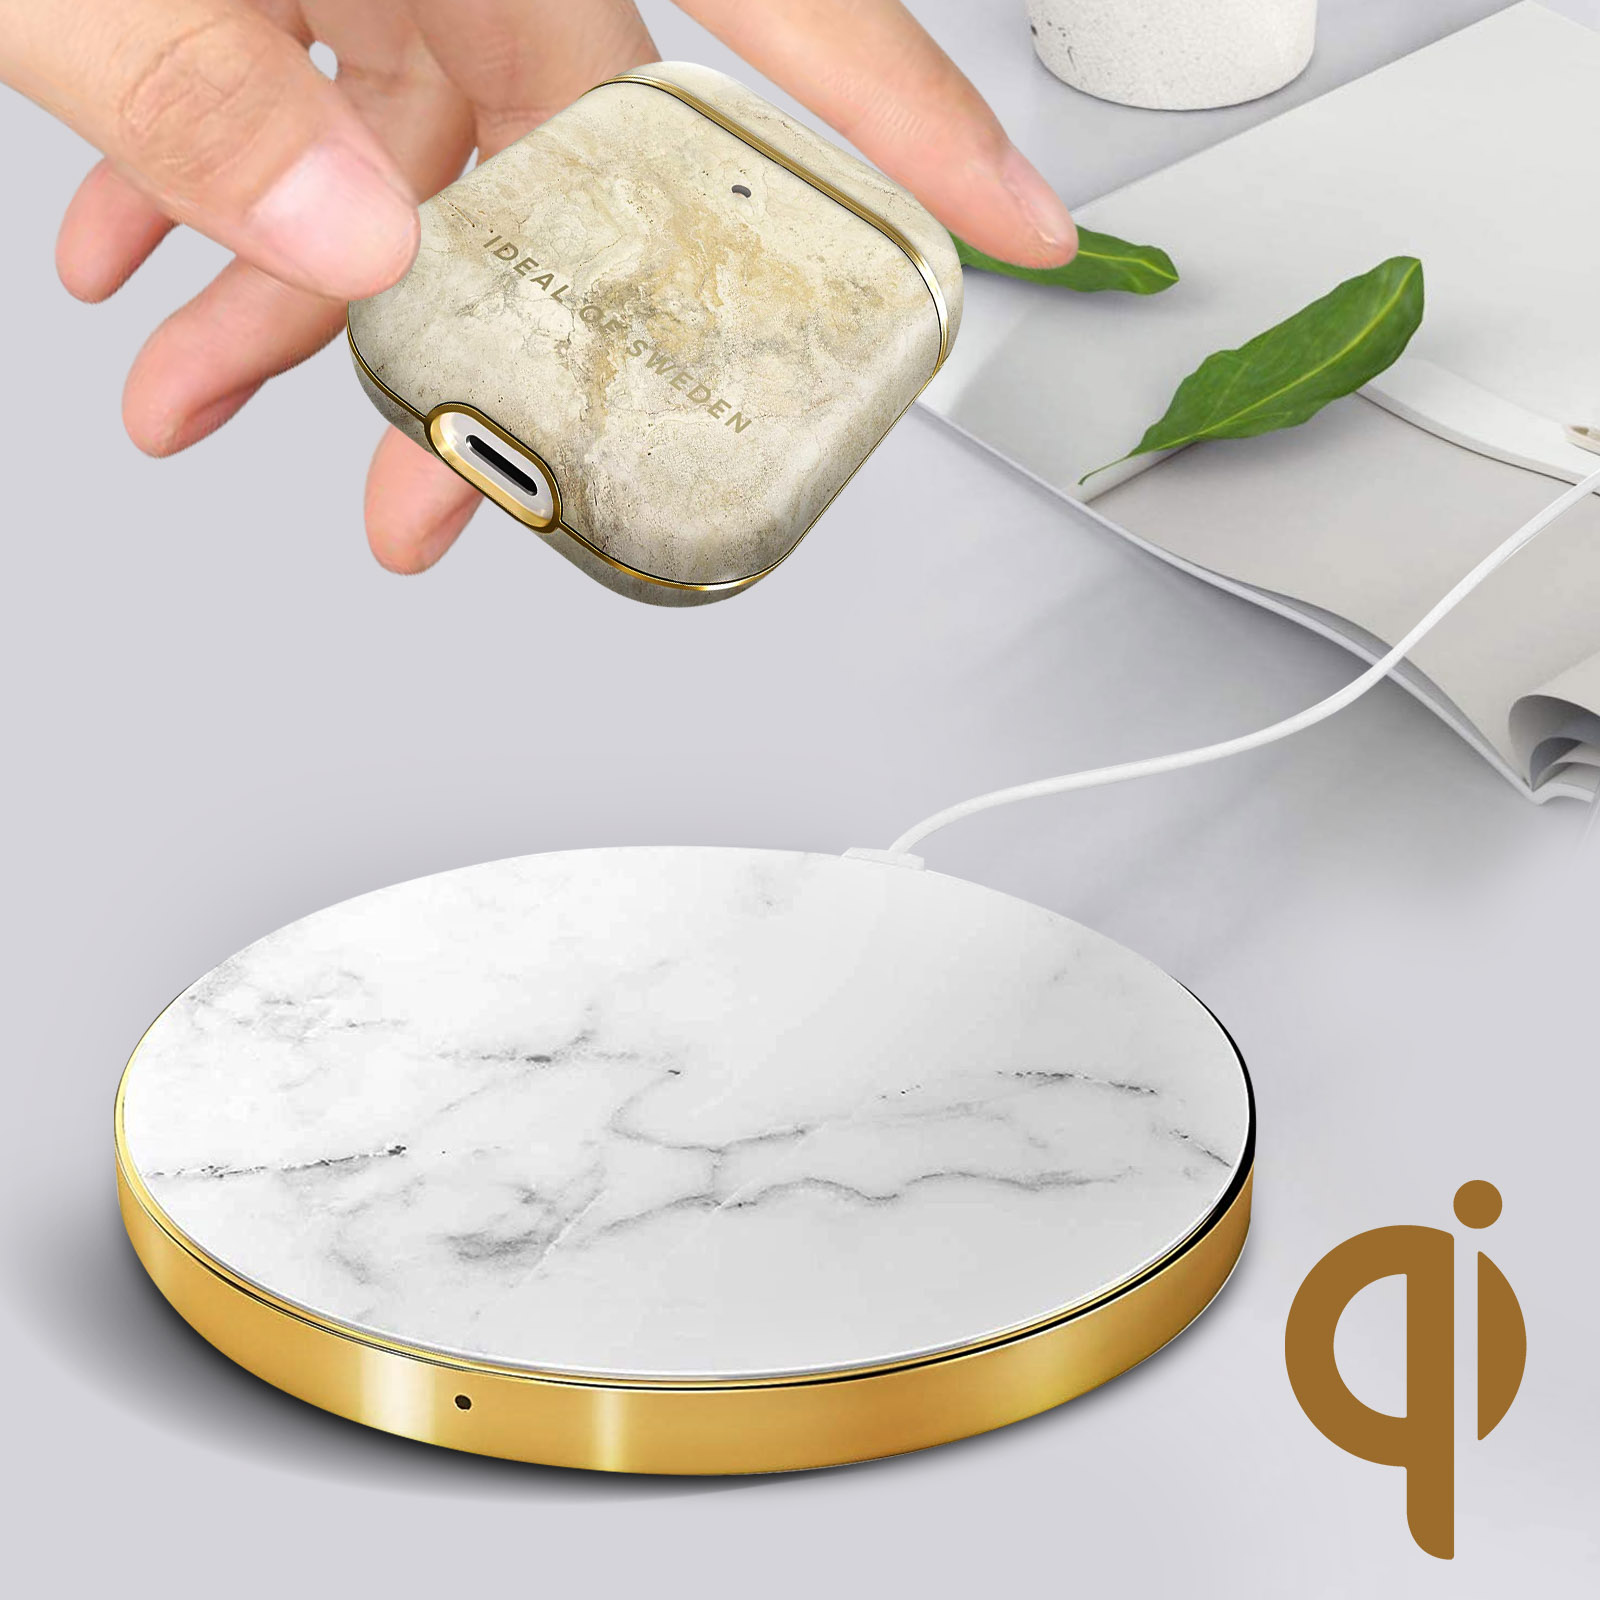 Full passend für: Case Sandstorm Marble IDEAL AirPod IDFAPC-195 OF Apple SWEDEN Cover